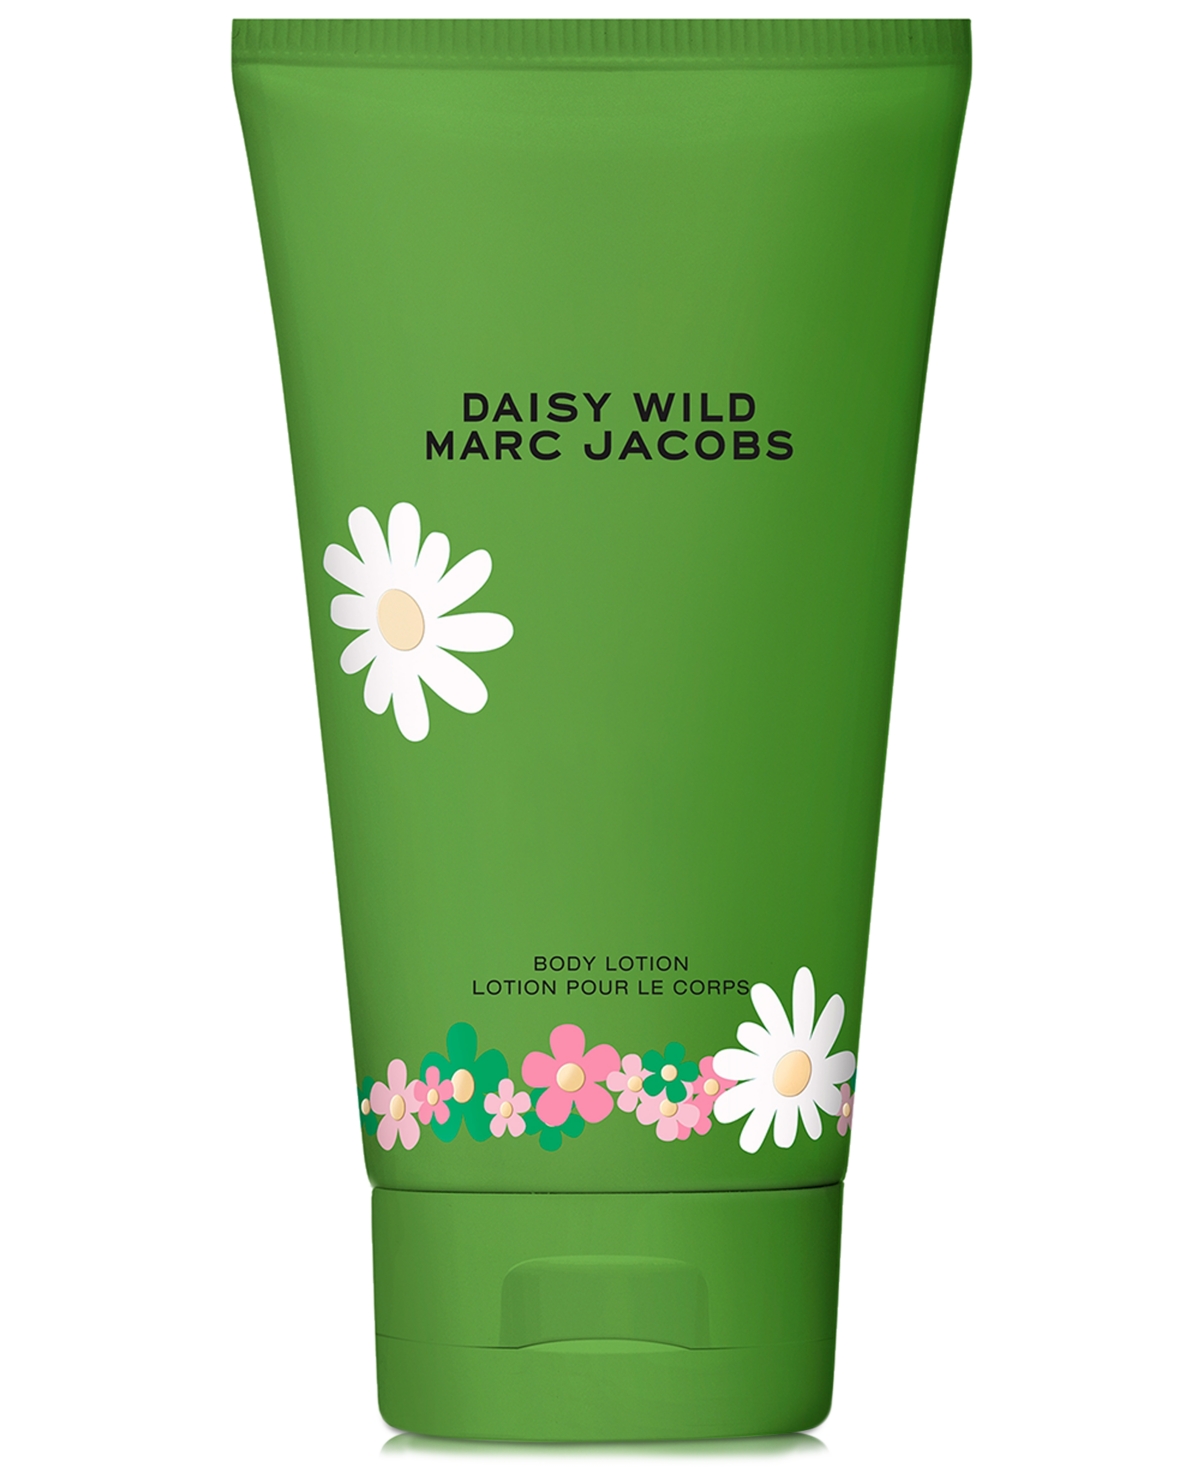 Marc Jacobs Daisy Wild Body Lotion, 5 Oz. In No Color